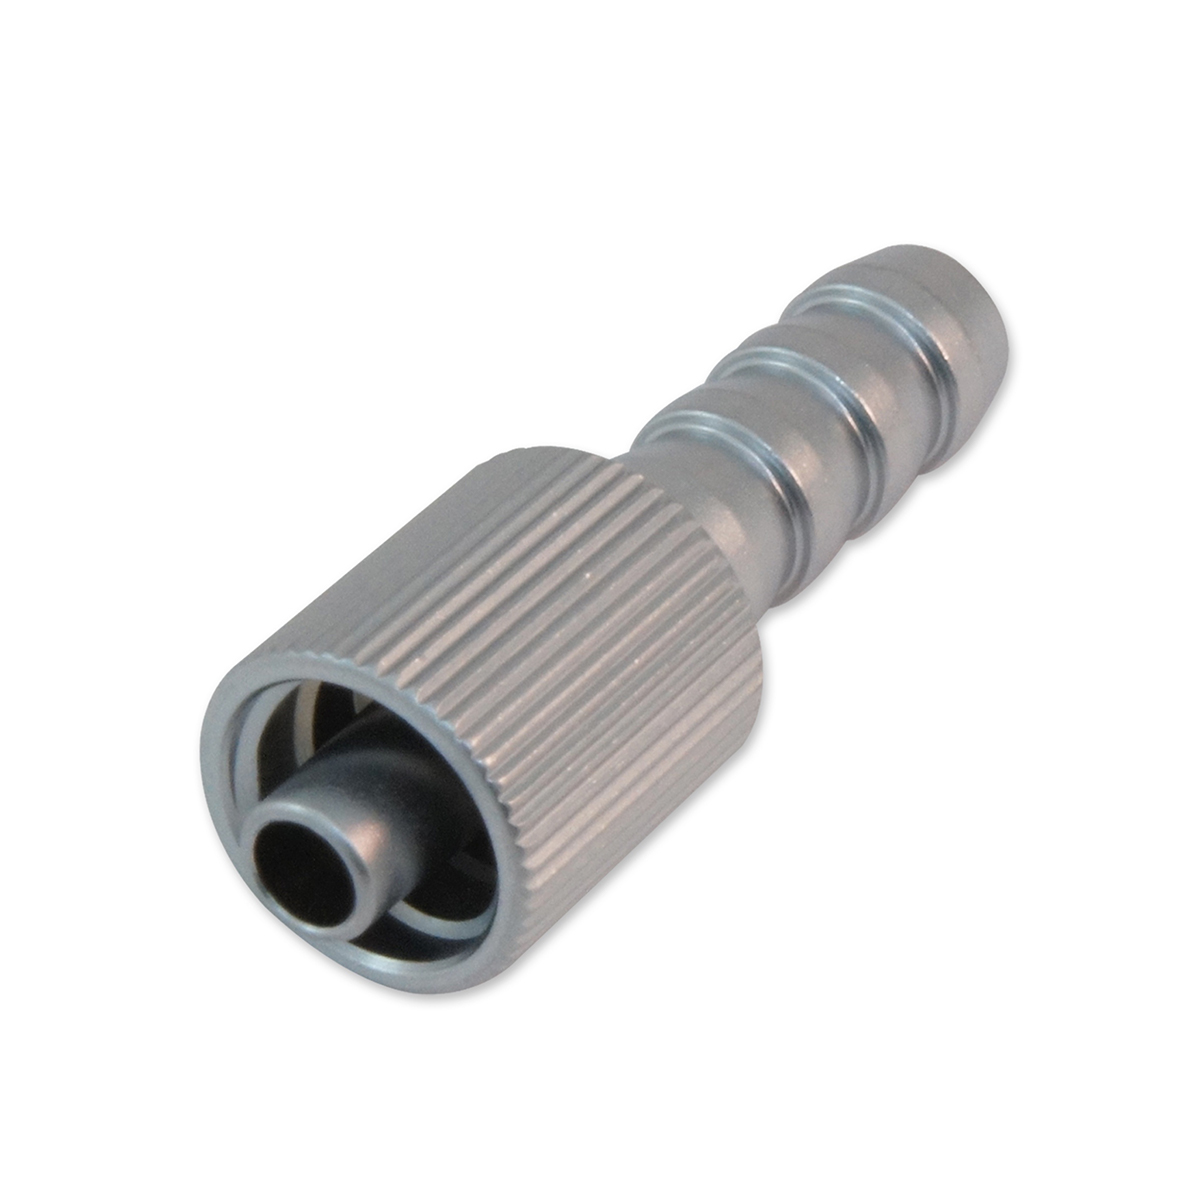 Tube connector Luer lock male Image